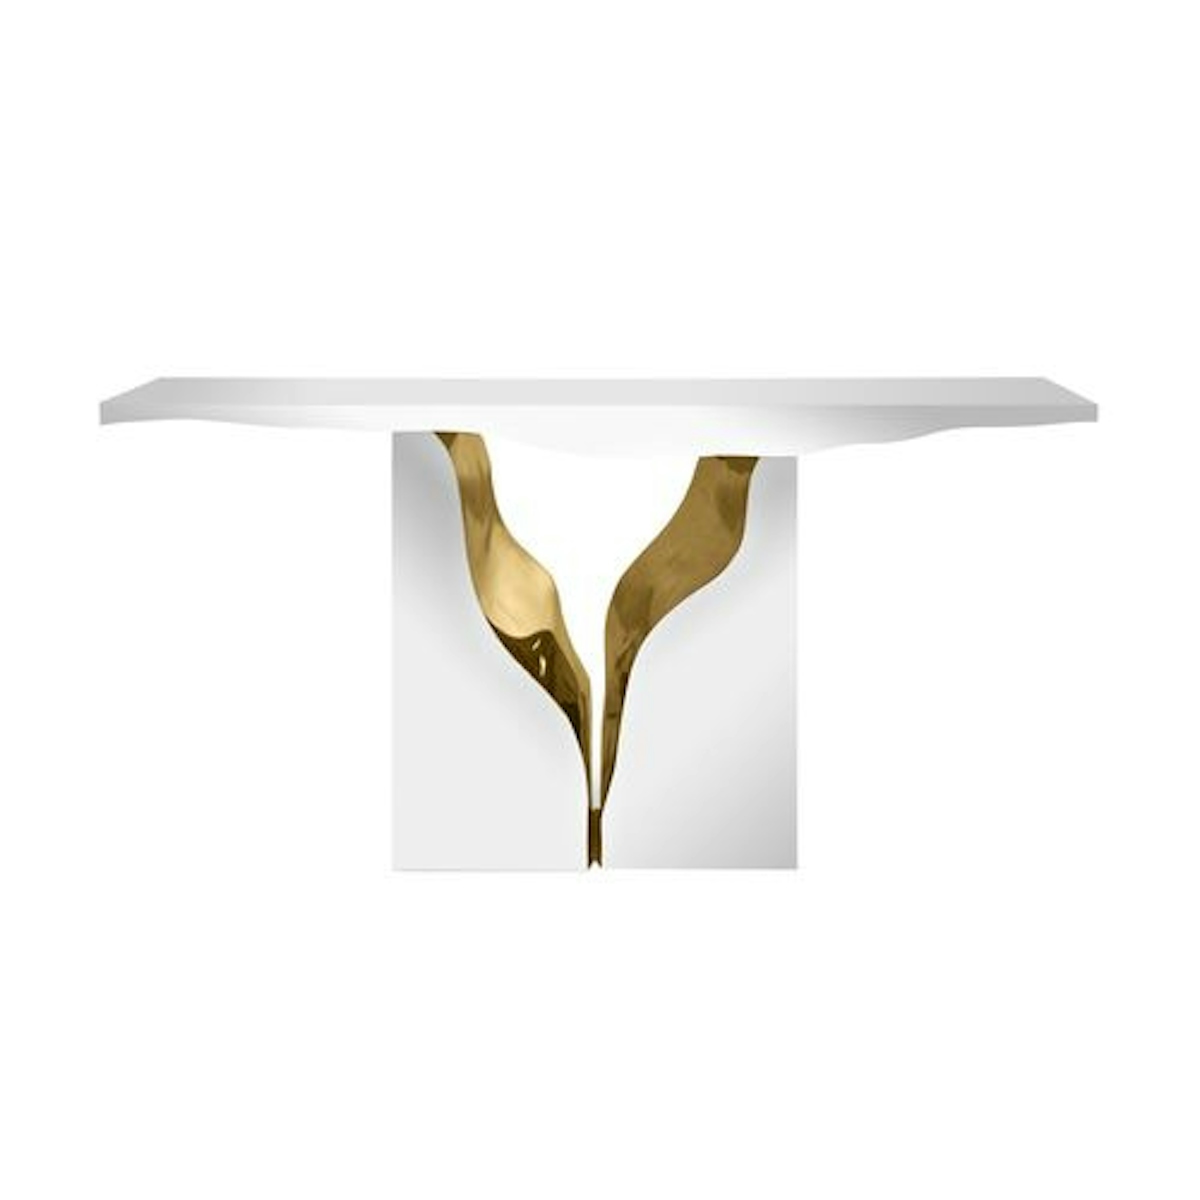 Gold and silver console table | Shop console tables online at LuxDeco.com.jpg